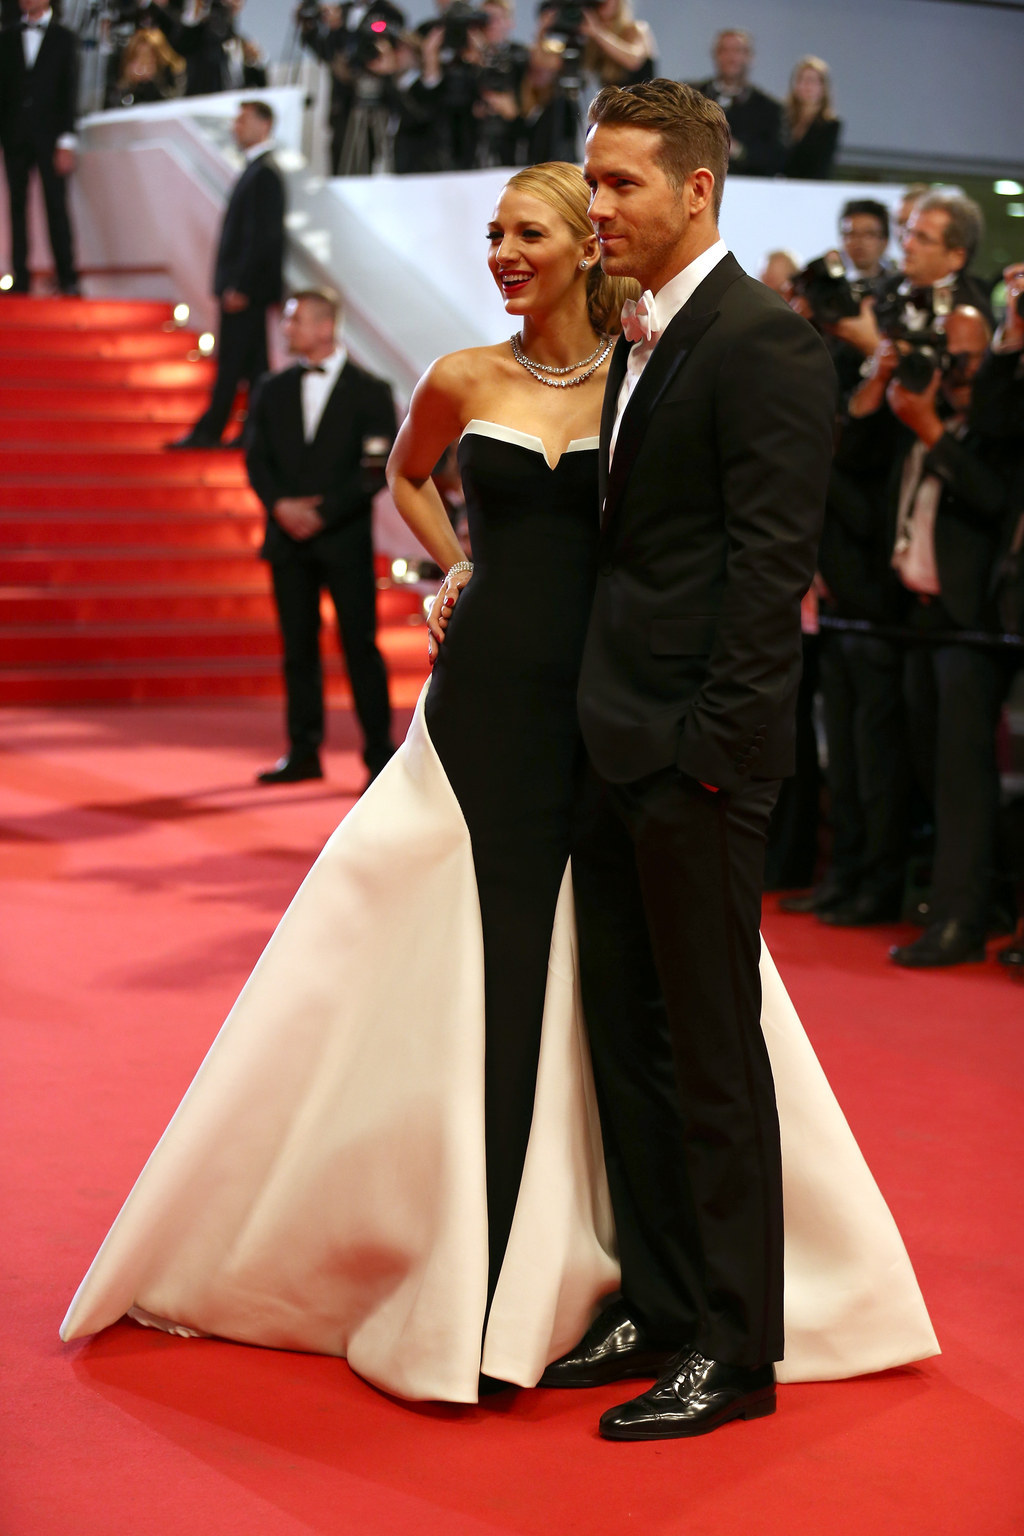 15 Photos Of Blake Lively Smiling With Her Husband Ryan Reynolds At Cannes1024 x 1536